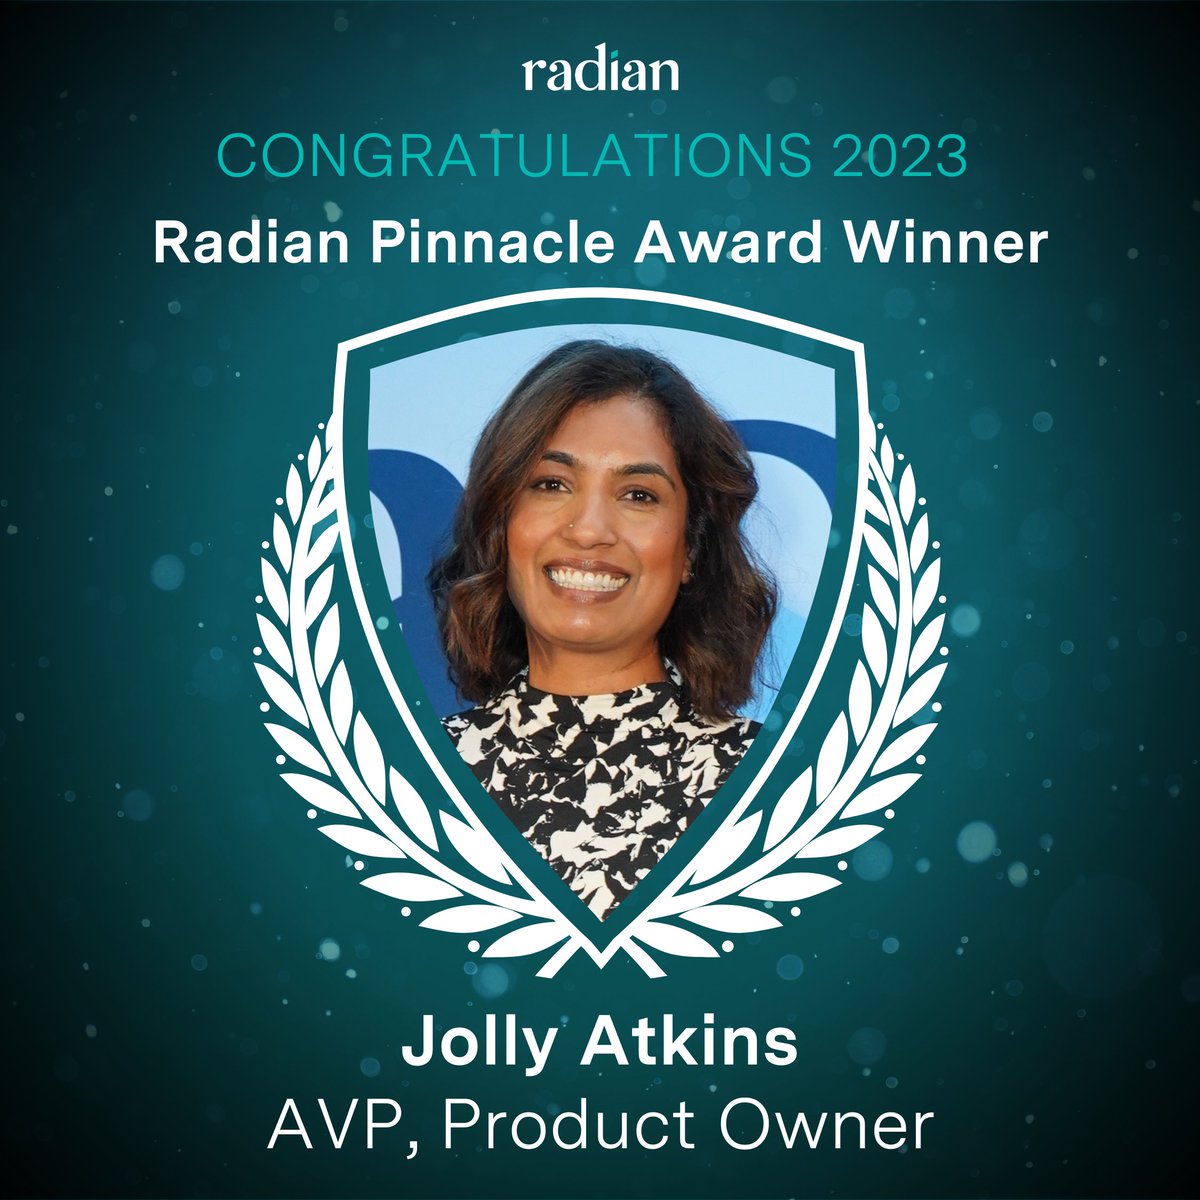 We're thrilled to feature Pinnacle Award winner and AVP, Product Owner, Jolly Atkins! Her strategy for success aligns with her strong skills: “My strategy for success is developing a plan with actionable steps...and continuously learning and adapting.” 
#OneRadian #PartnerToWin